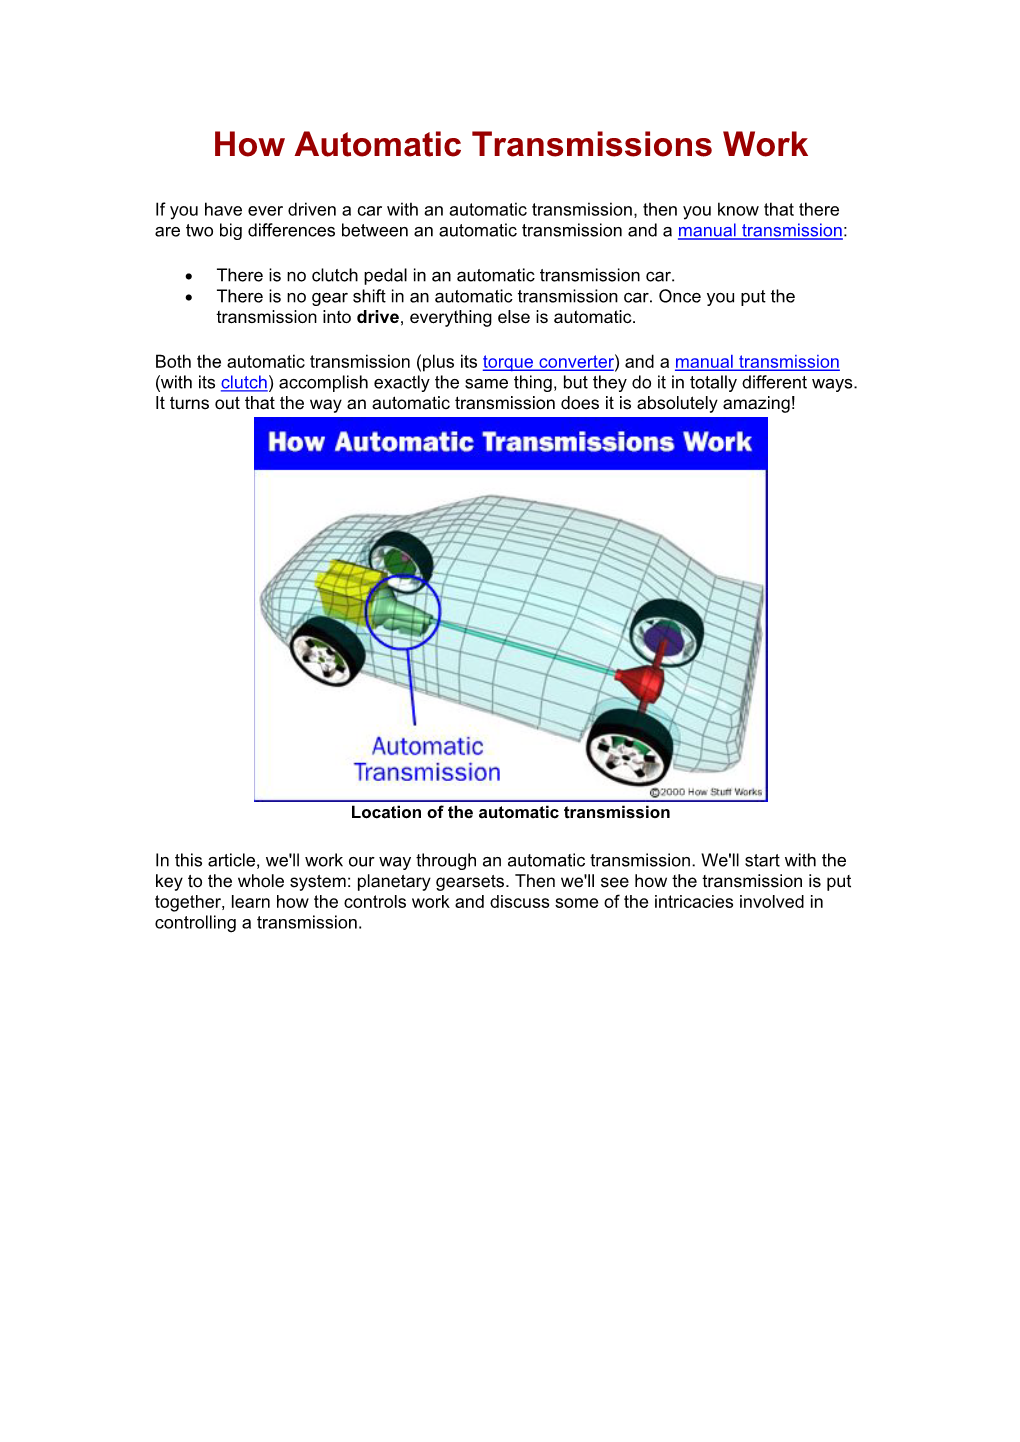 How Automatic Transmissions Work